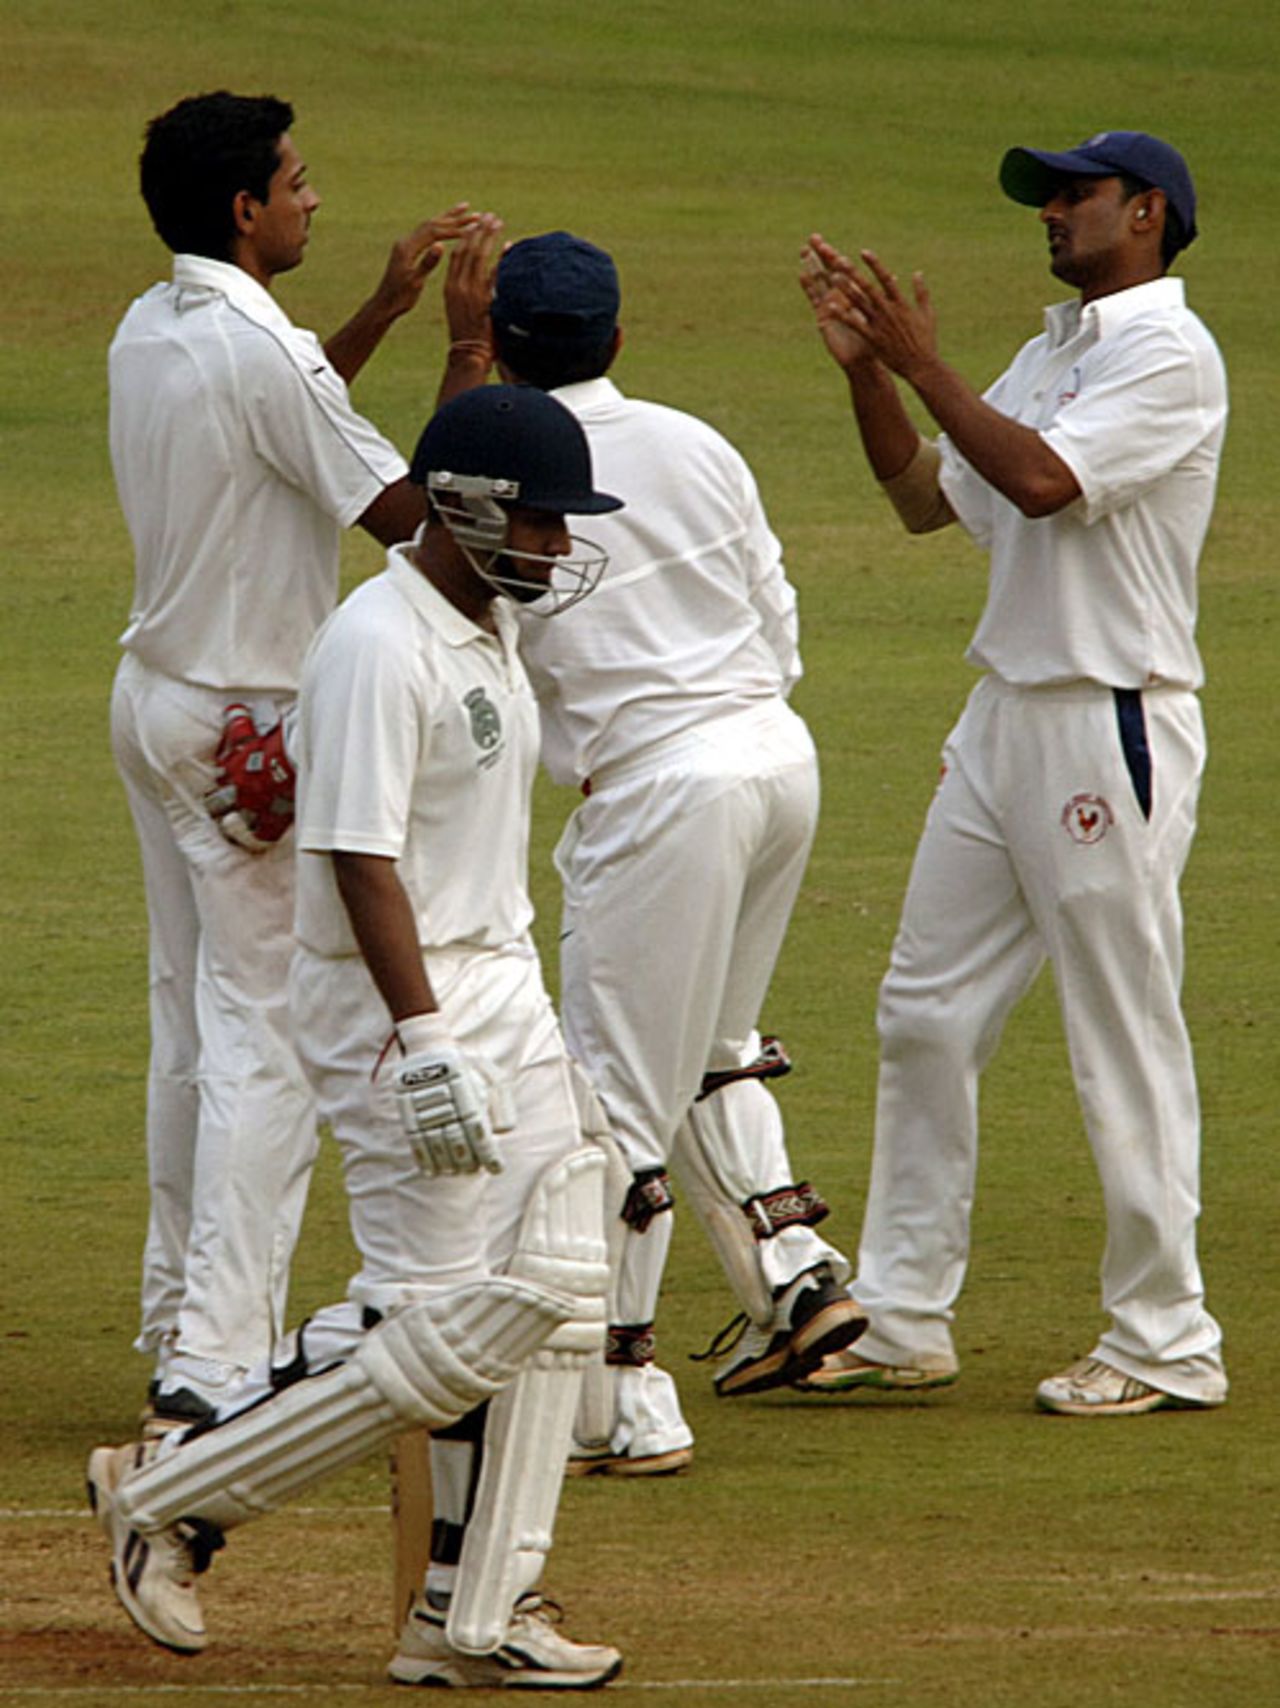 RR Parida walks back for 47 after being dismissed by Dhawal Kulkarni, West Zone v East Zone, Duleep Trophy semi-final, Mumbai, 2nd day, January 30, 2009